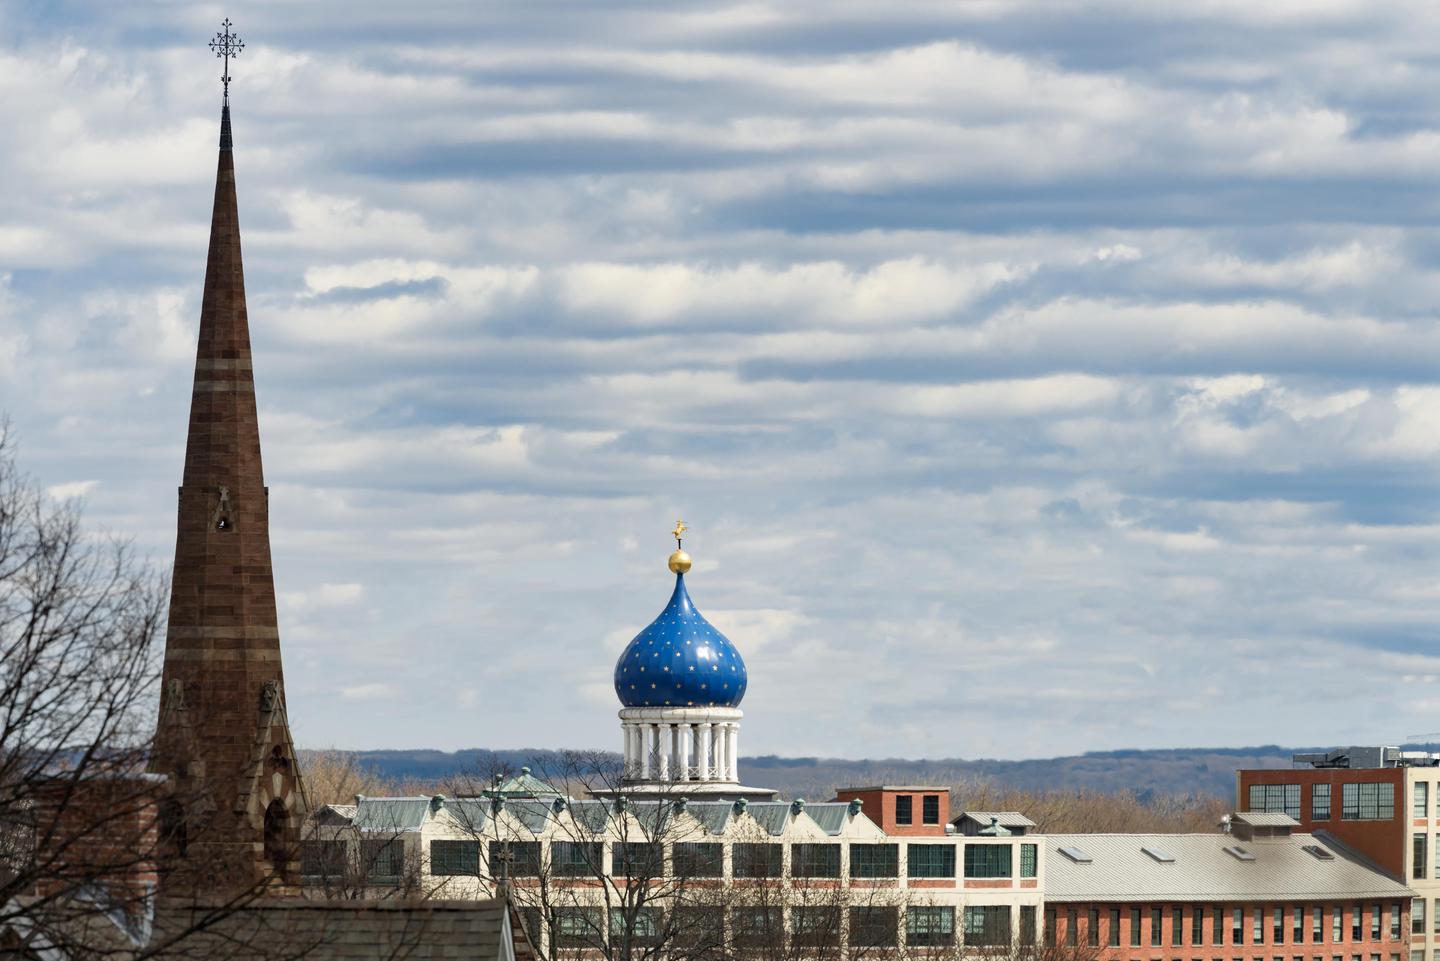 Coltsville Dome and the Church of the Good ShepherdThe Blue Onion Dome was rebuilt after the fire in February of 1864. Today it graces the skyline of Hartford, just as the the Church of the Good Shepherd does, reminding those who see if of the Colts and their legacy.